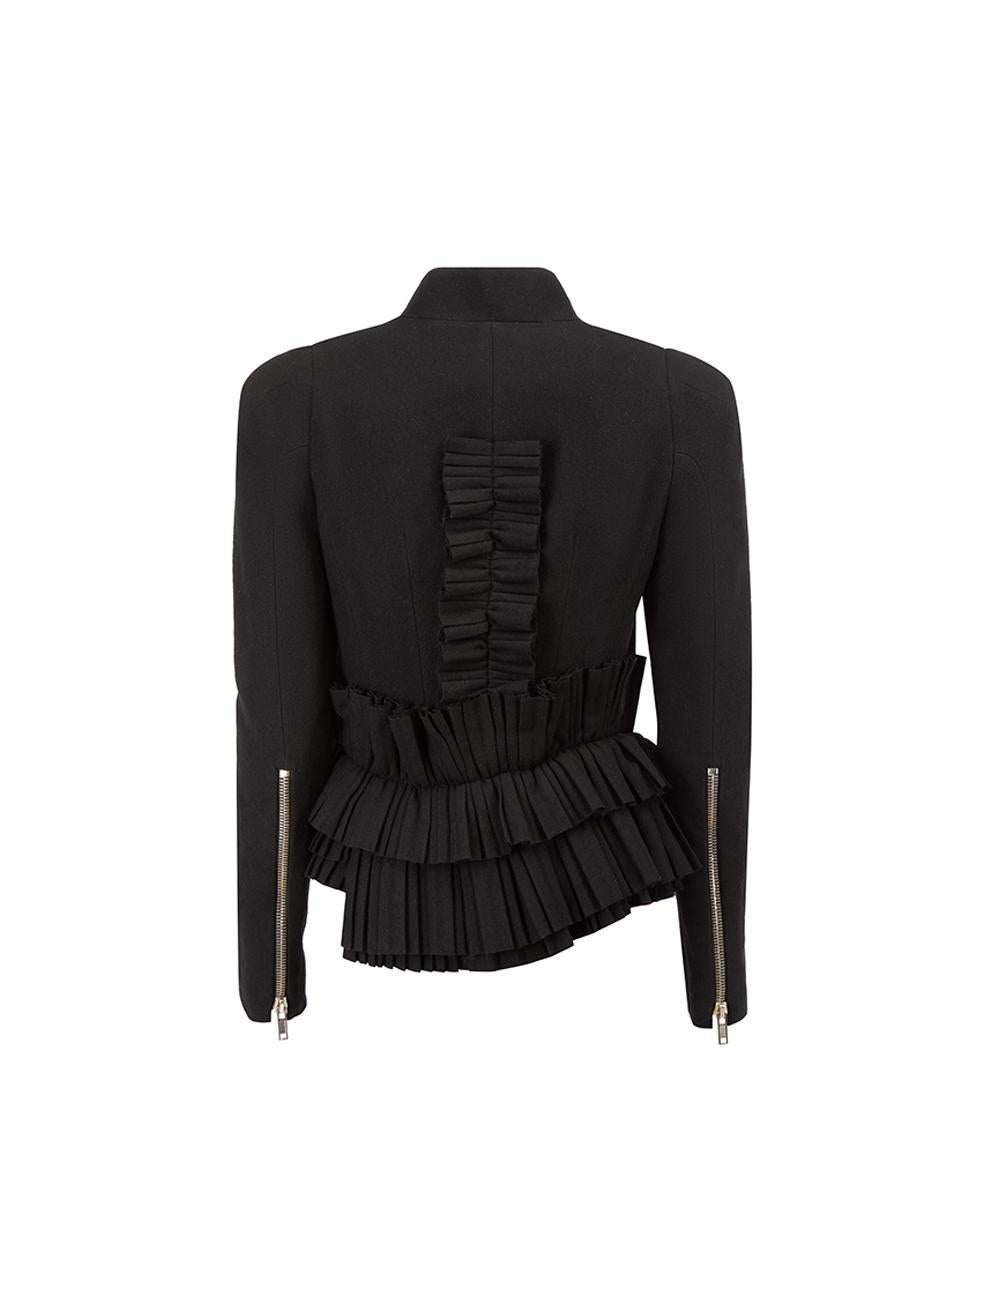 Givenchy Black Wool Ruffle Trim Asymmetric Jacket Size M In Good Condition In London, GB